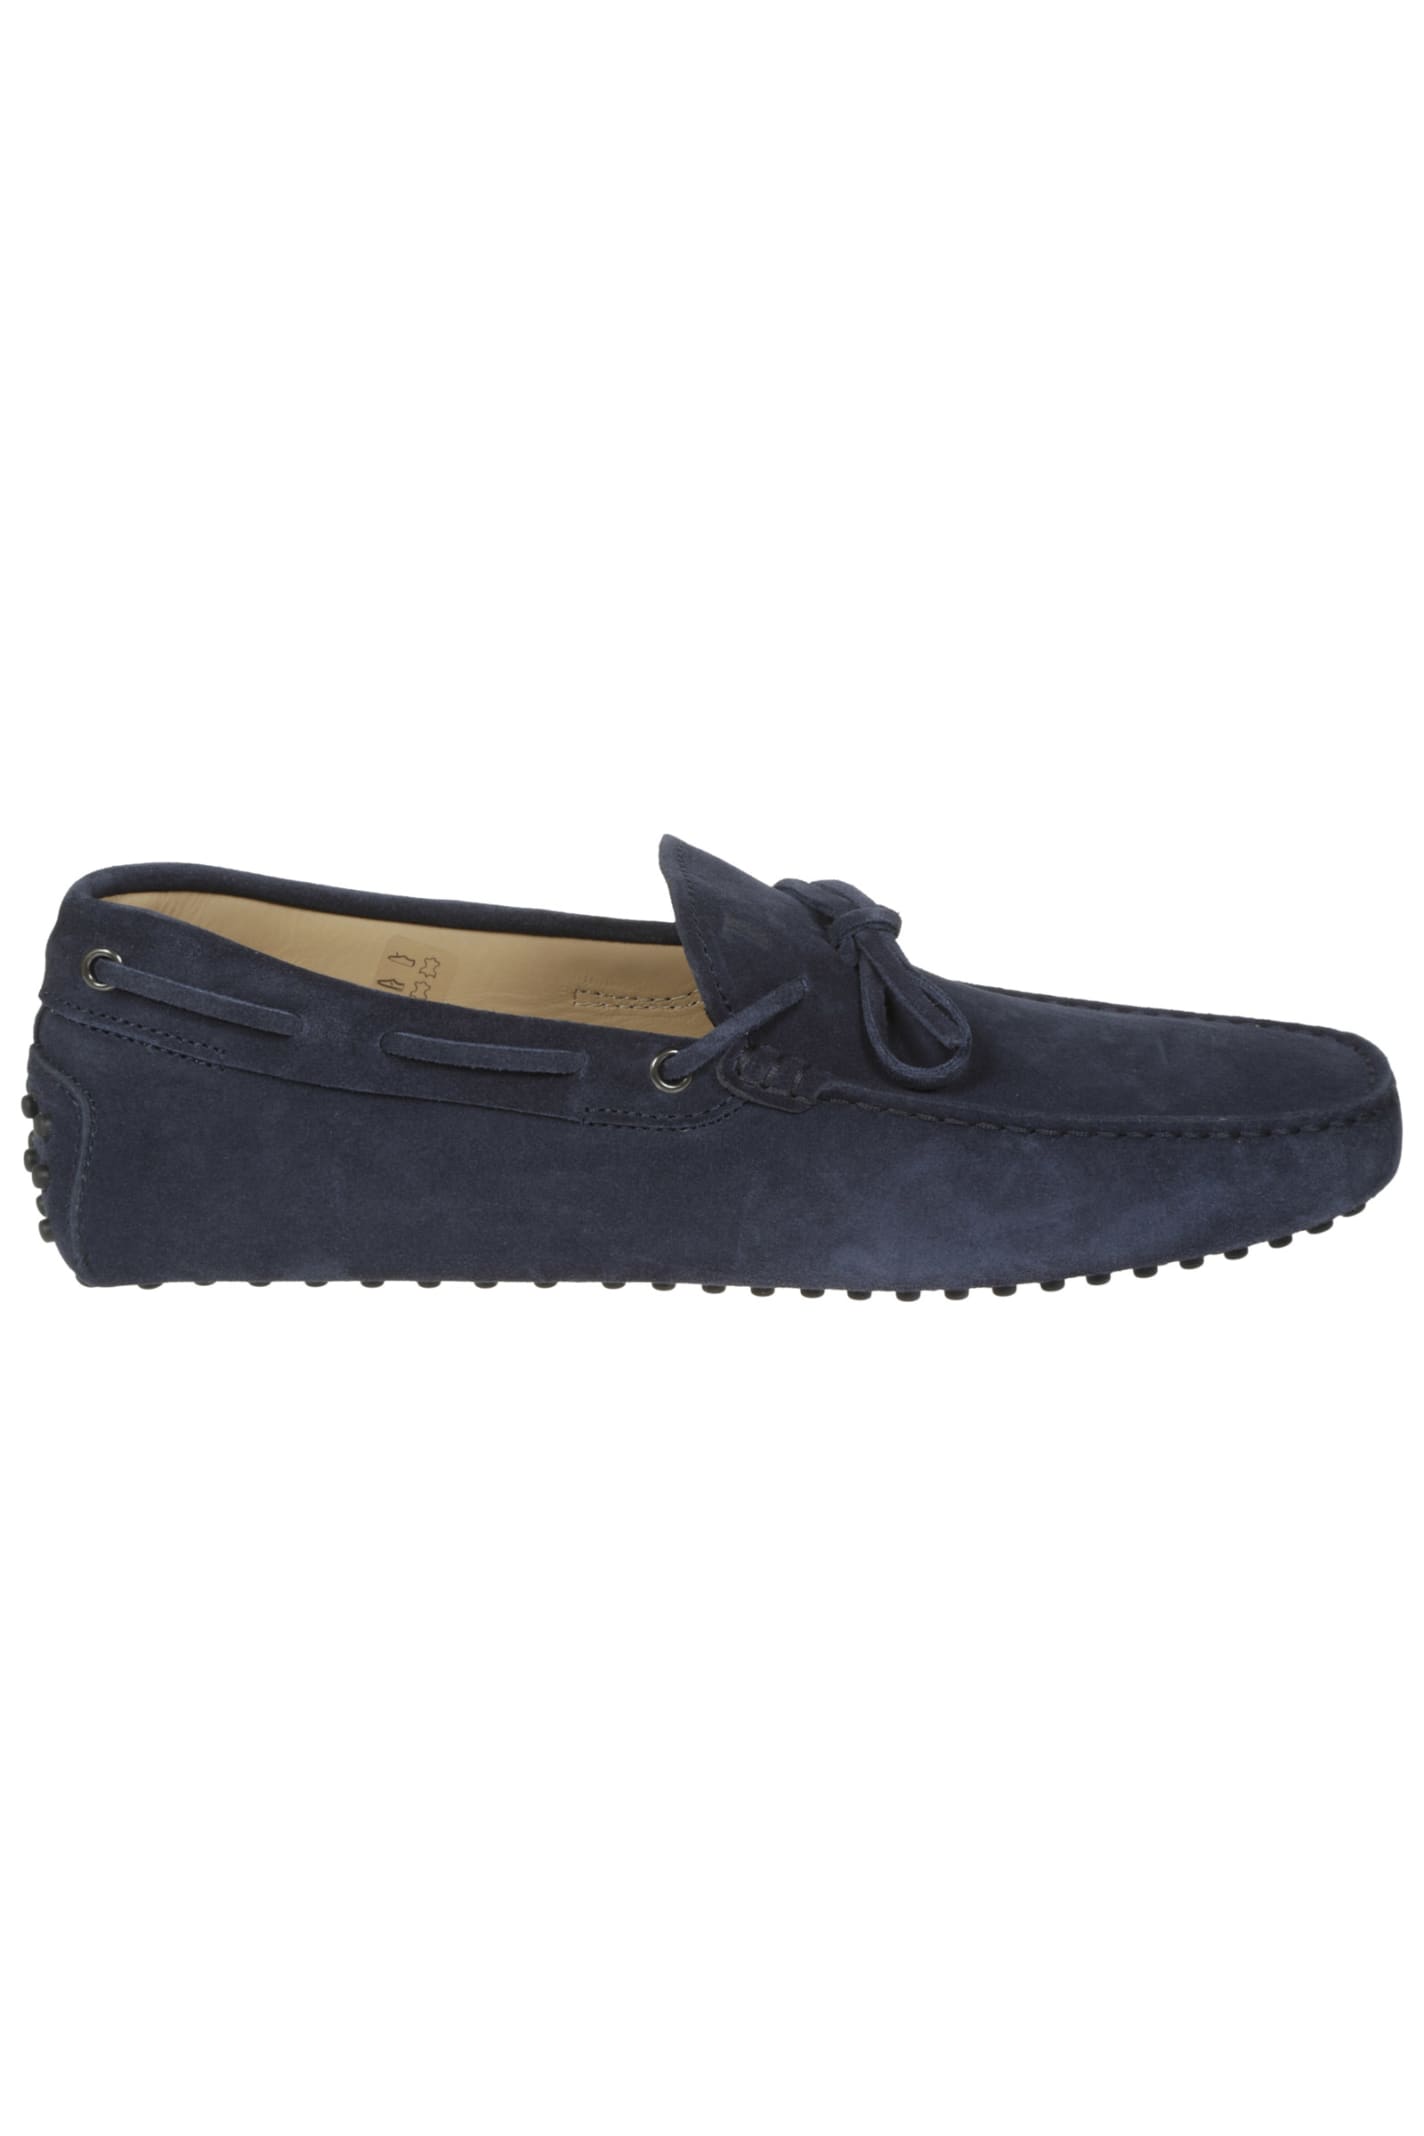 Tods New Gommini Loafers